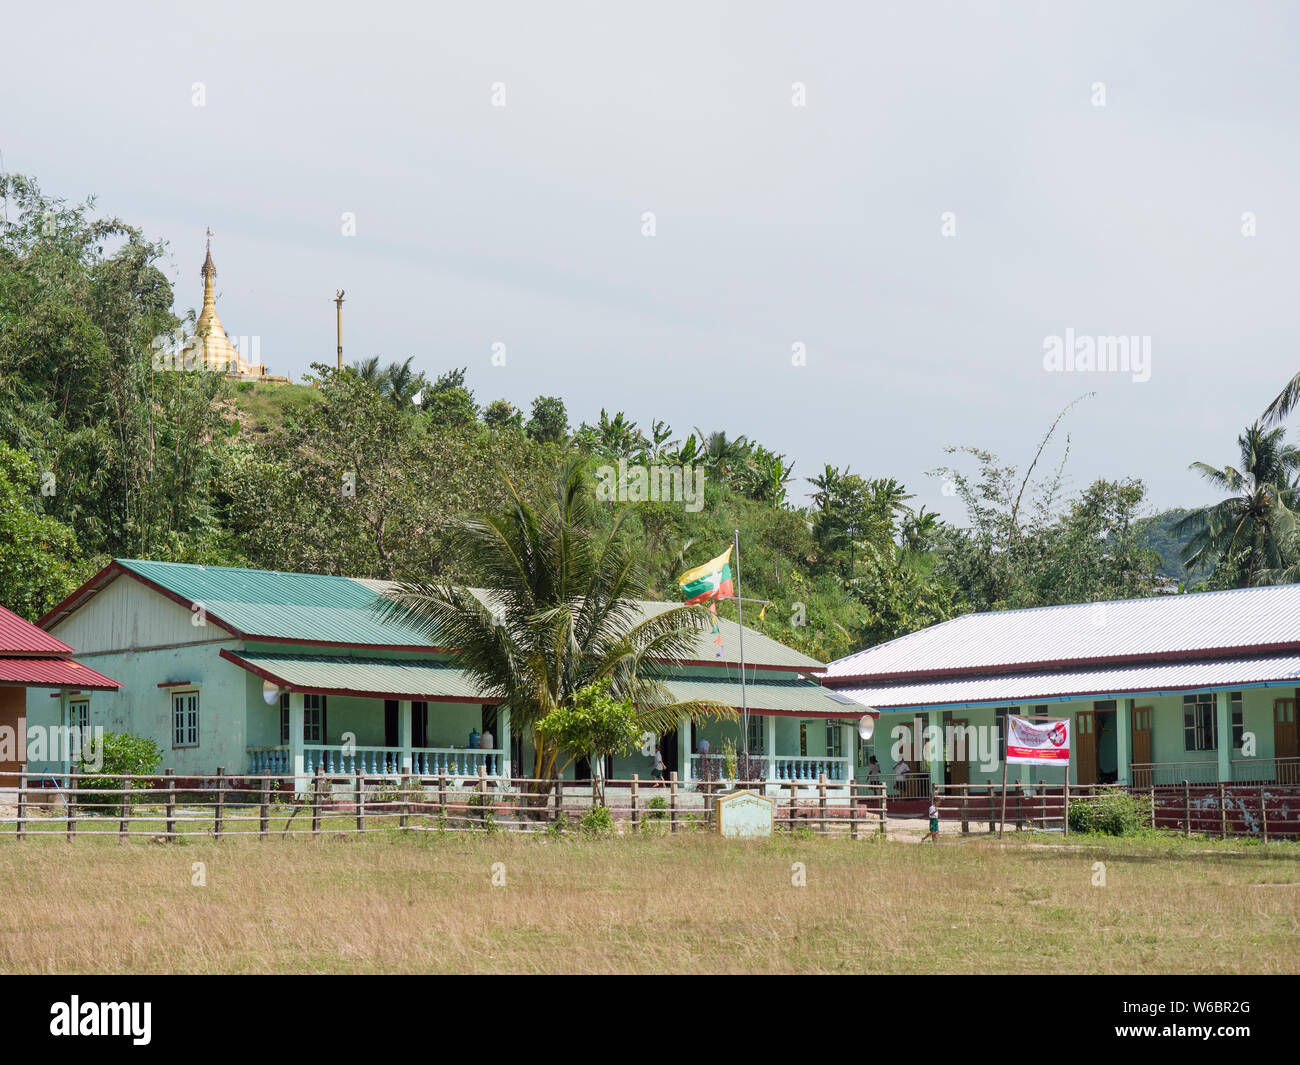 Myeik, Myanmar - November 7, 2017: Primary school for Moken, sea gypsy, children at Dome Island, a part of the Myeik Archipelago in the Tanintharyi Re Stock Photo